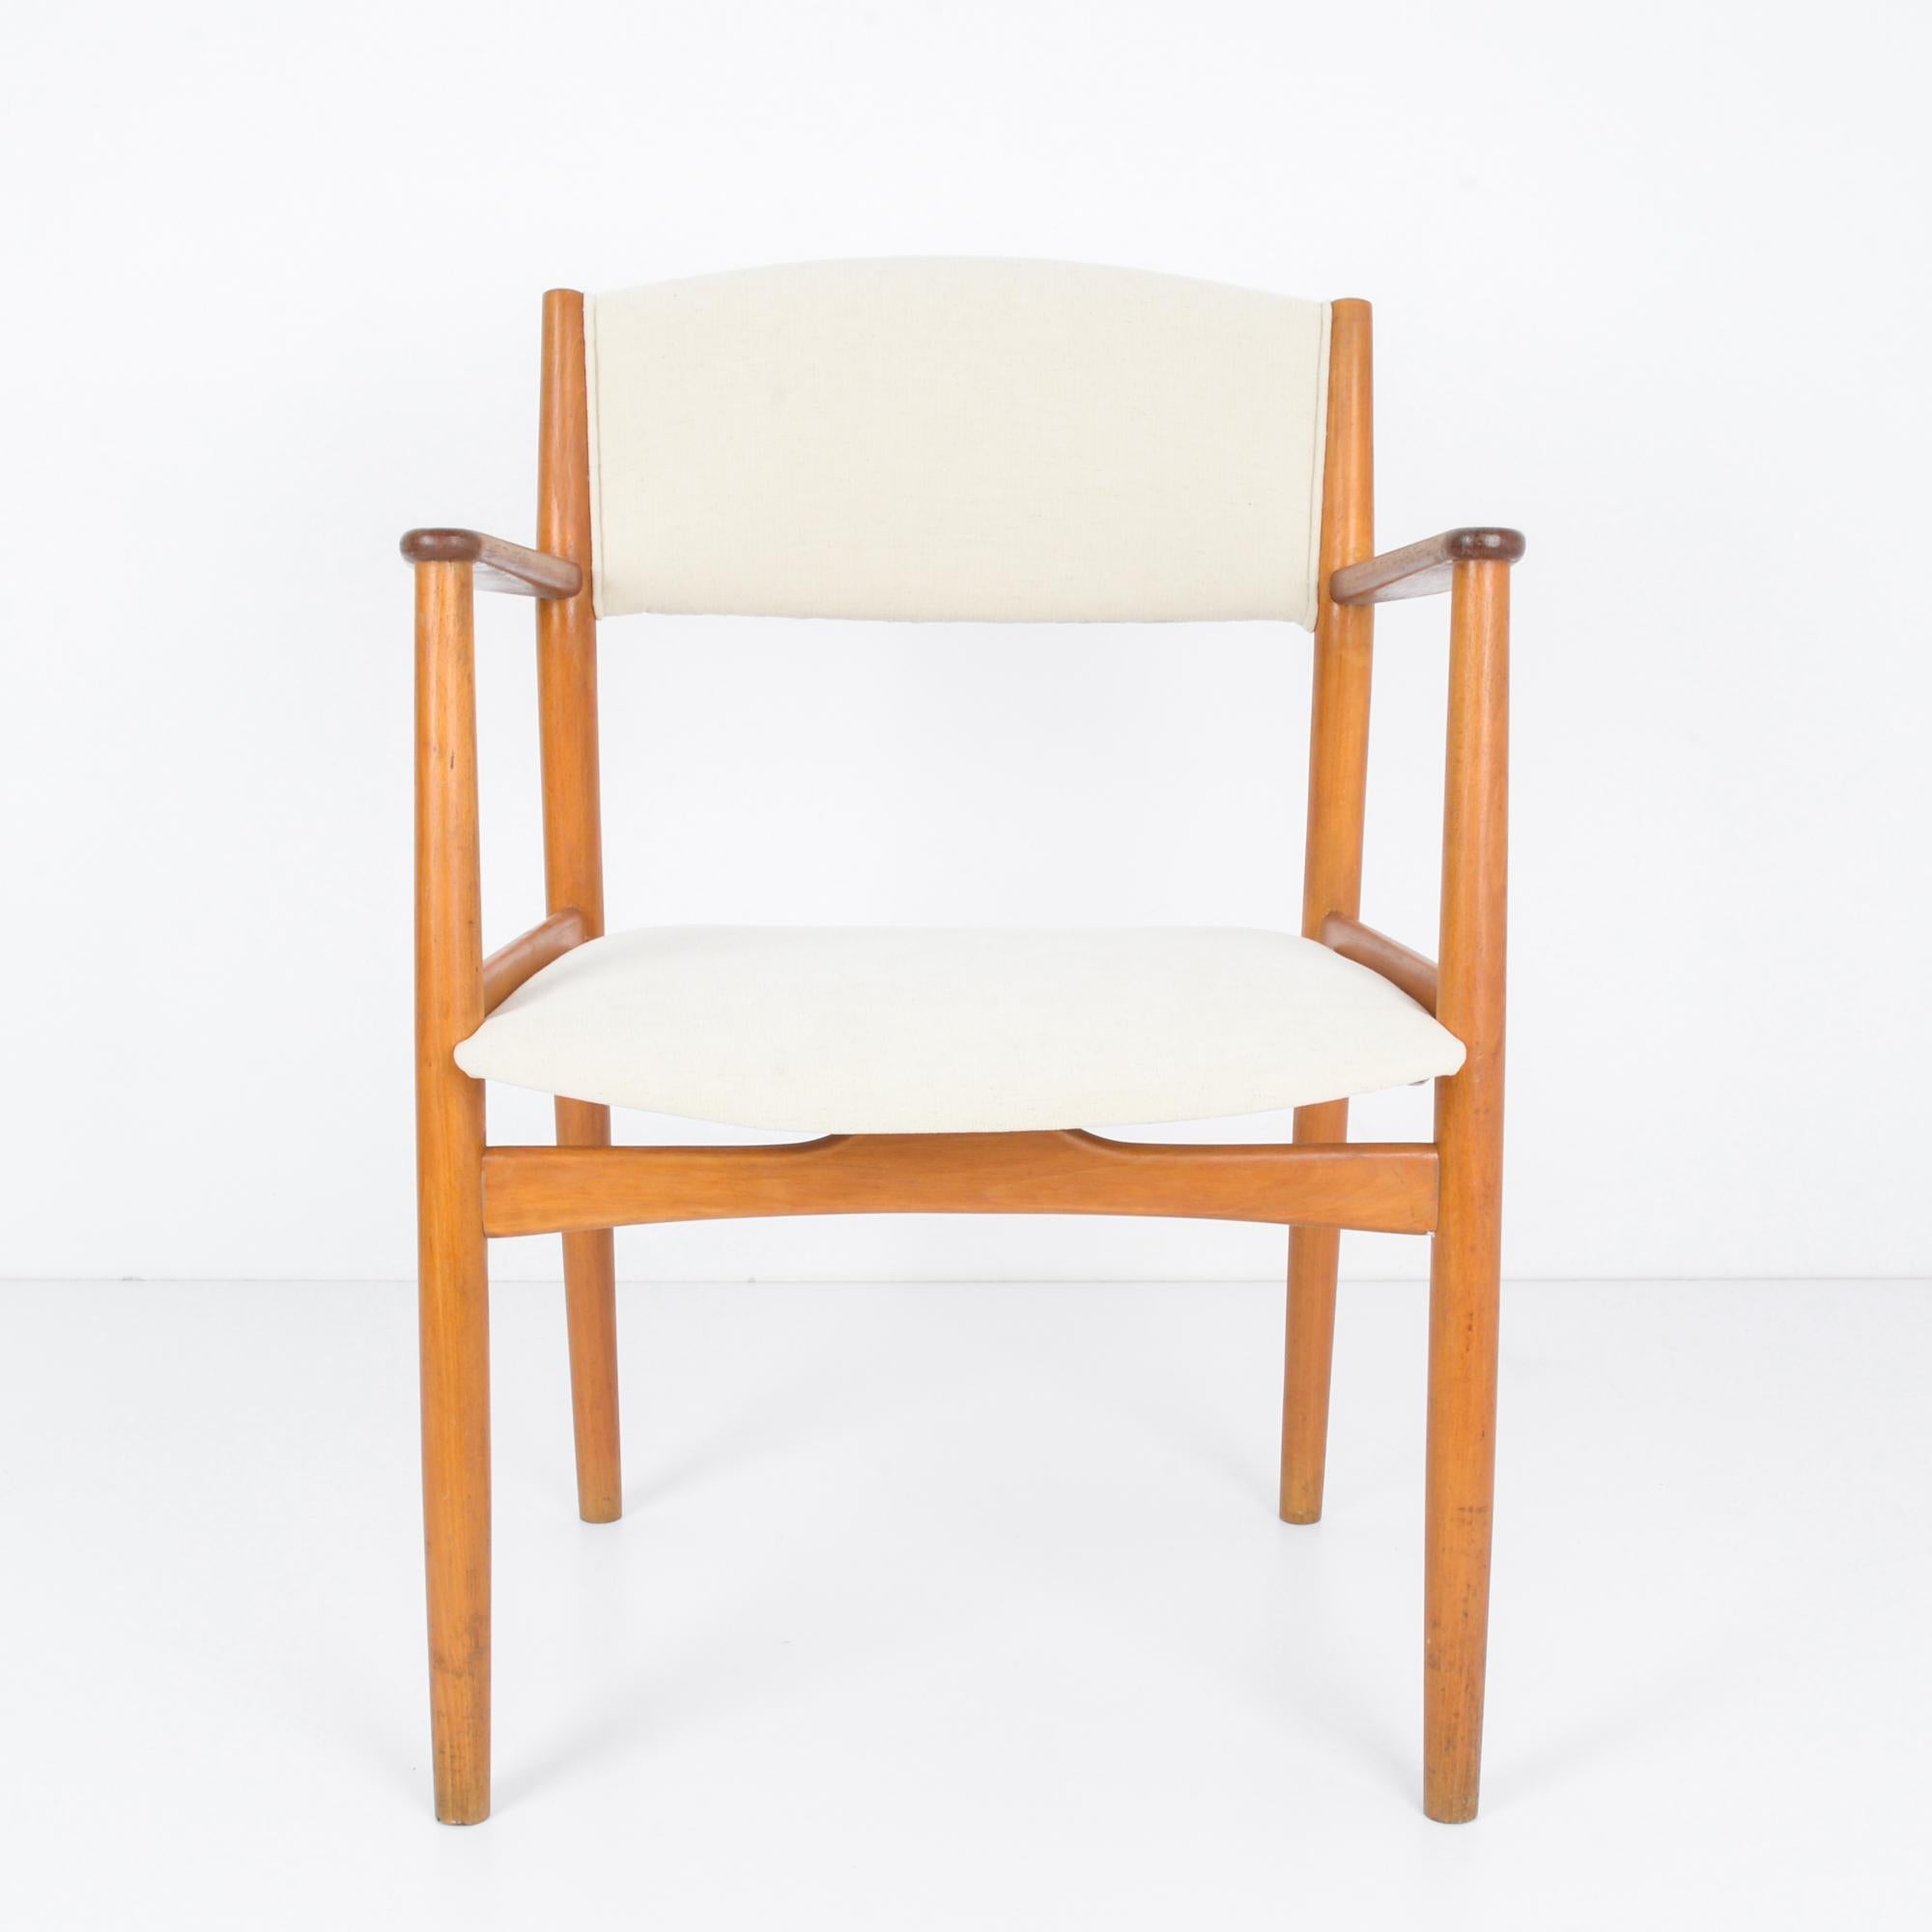 In the innovative design landscape of 1960s Denmark, this wooden armchair with an upholstered seat and back epitomizes the sleek sophistication and ergonomic comfort of the era. Crafted with meticulous attention to detail, this piece represents the